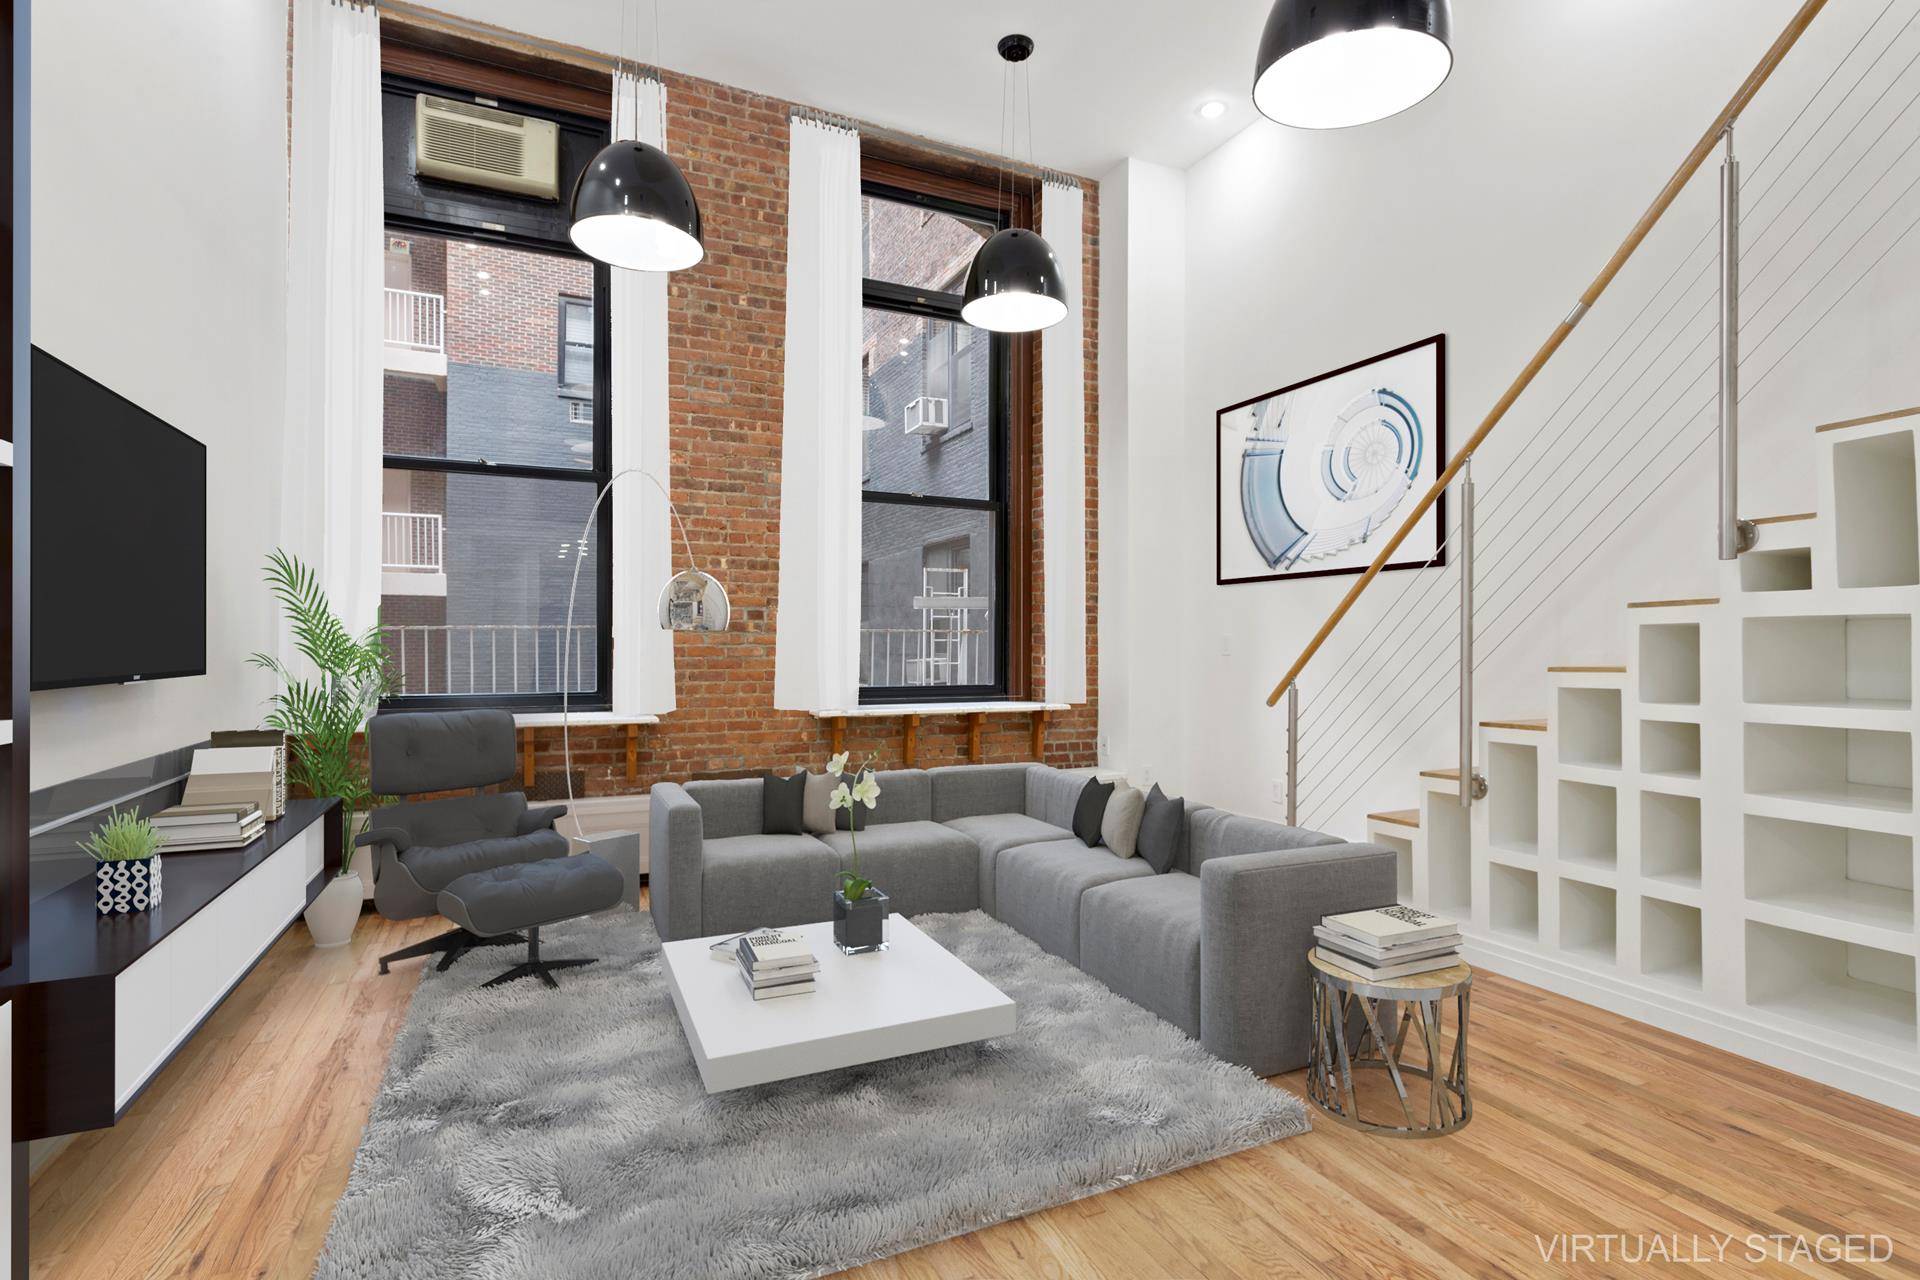 ACCEPTED OFFER You'll love coming home to this mint condition, gut renovated, one bedroom duplex loft with soaring 16 foot ceilings in one of the most sought after luxury buildings ...